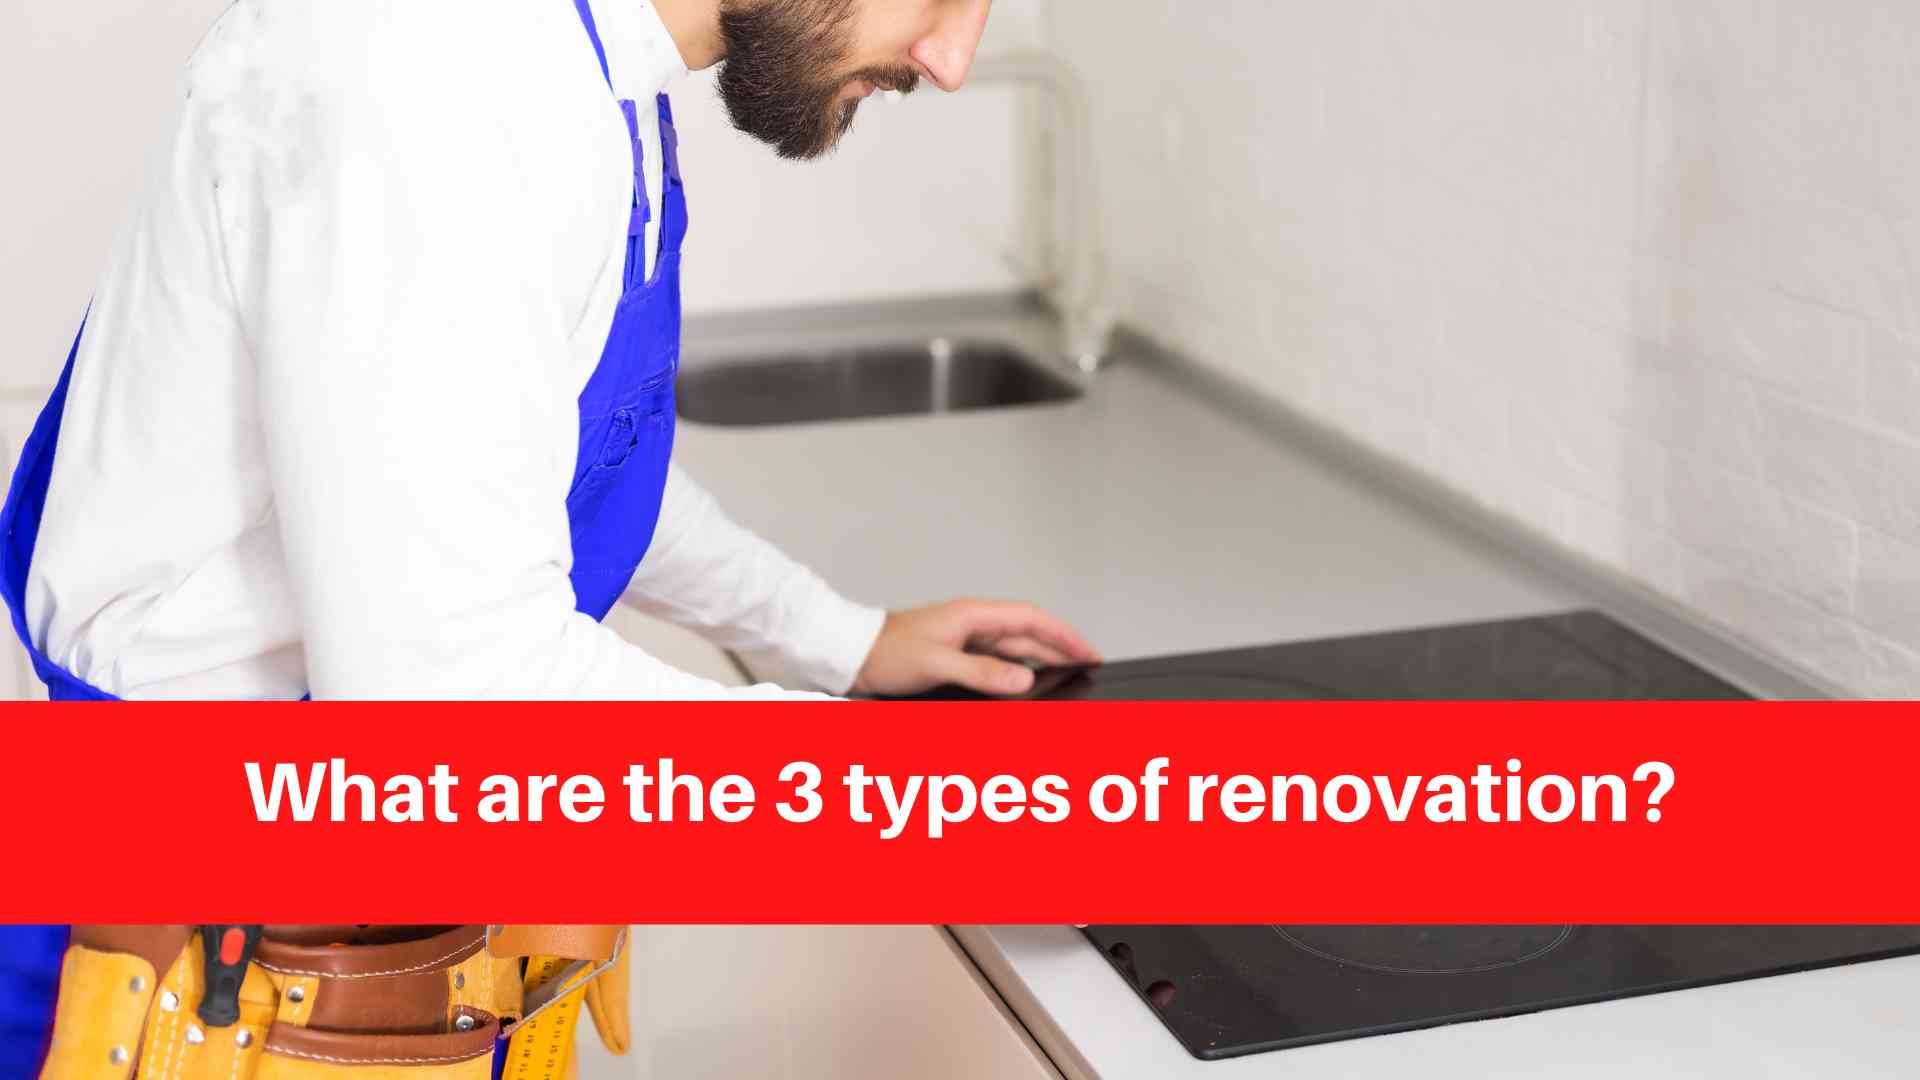 What are the 3 types of renovation